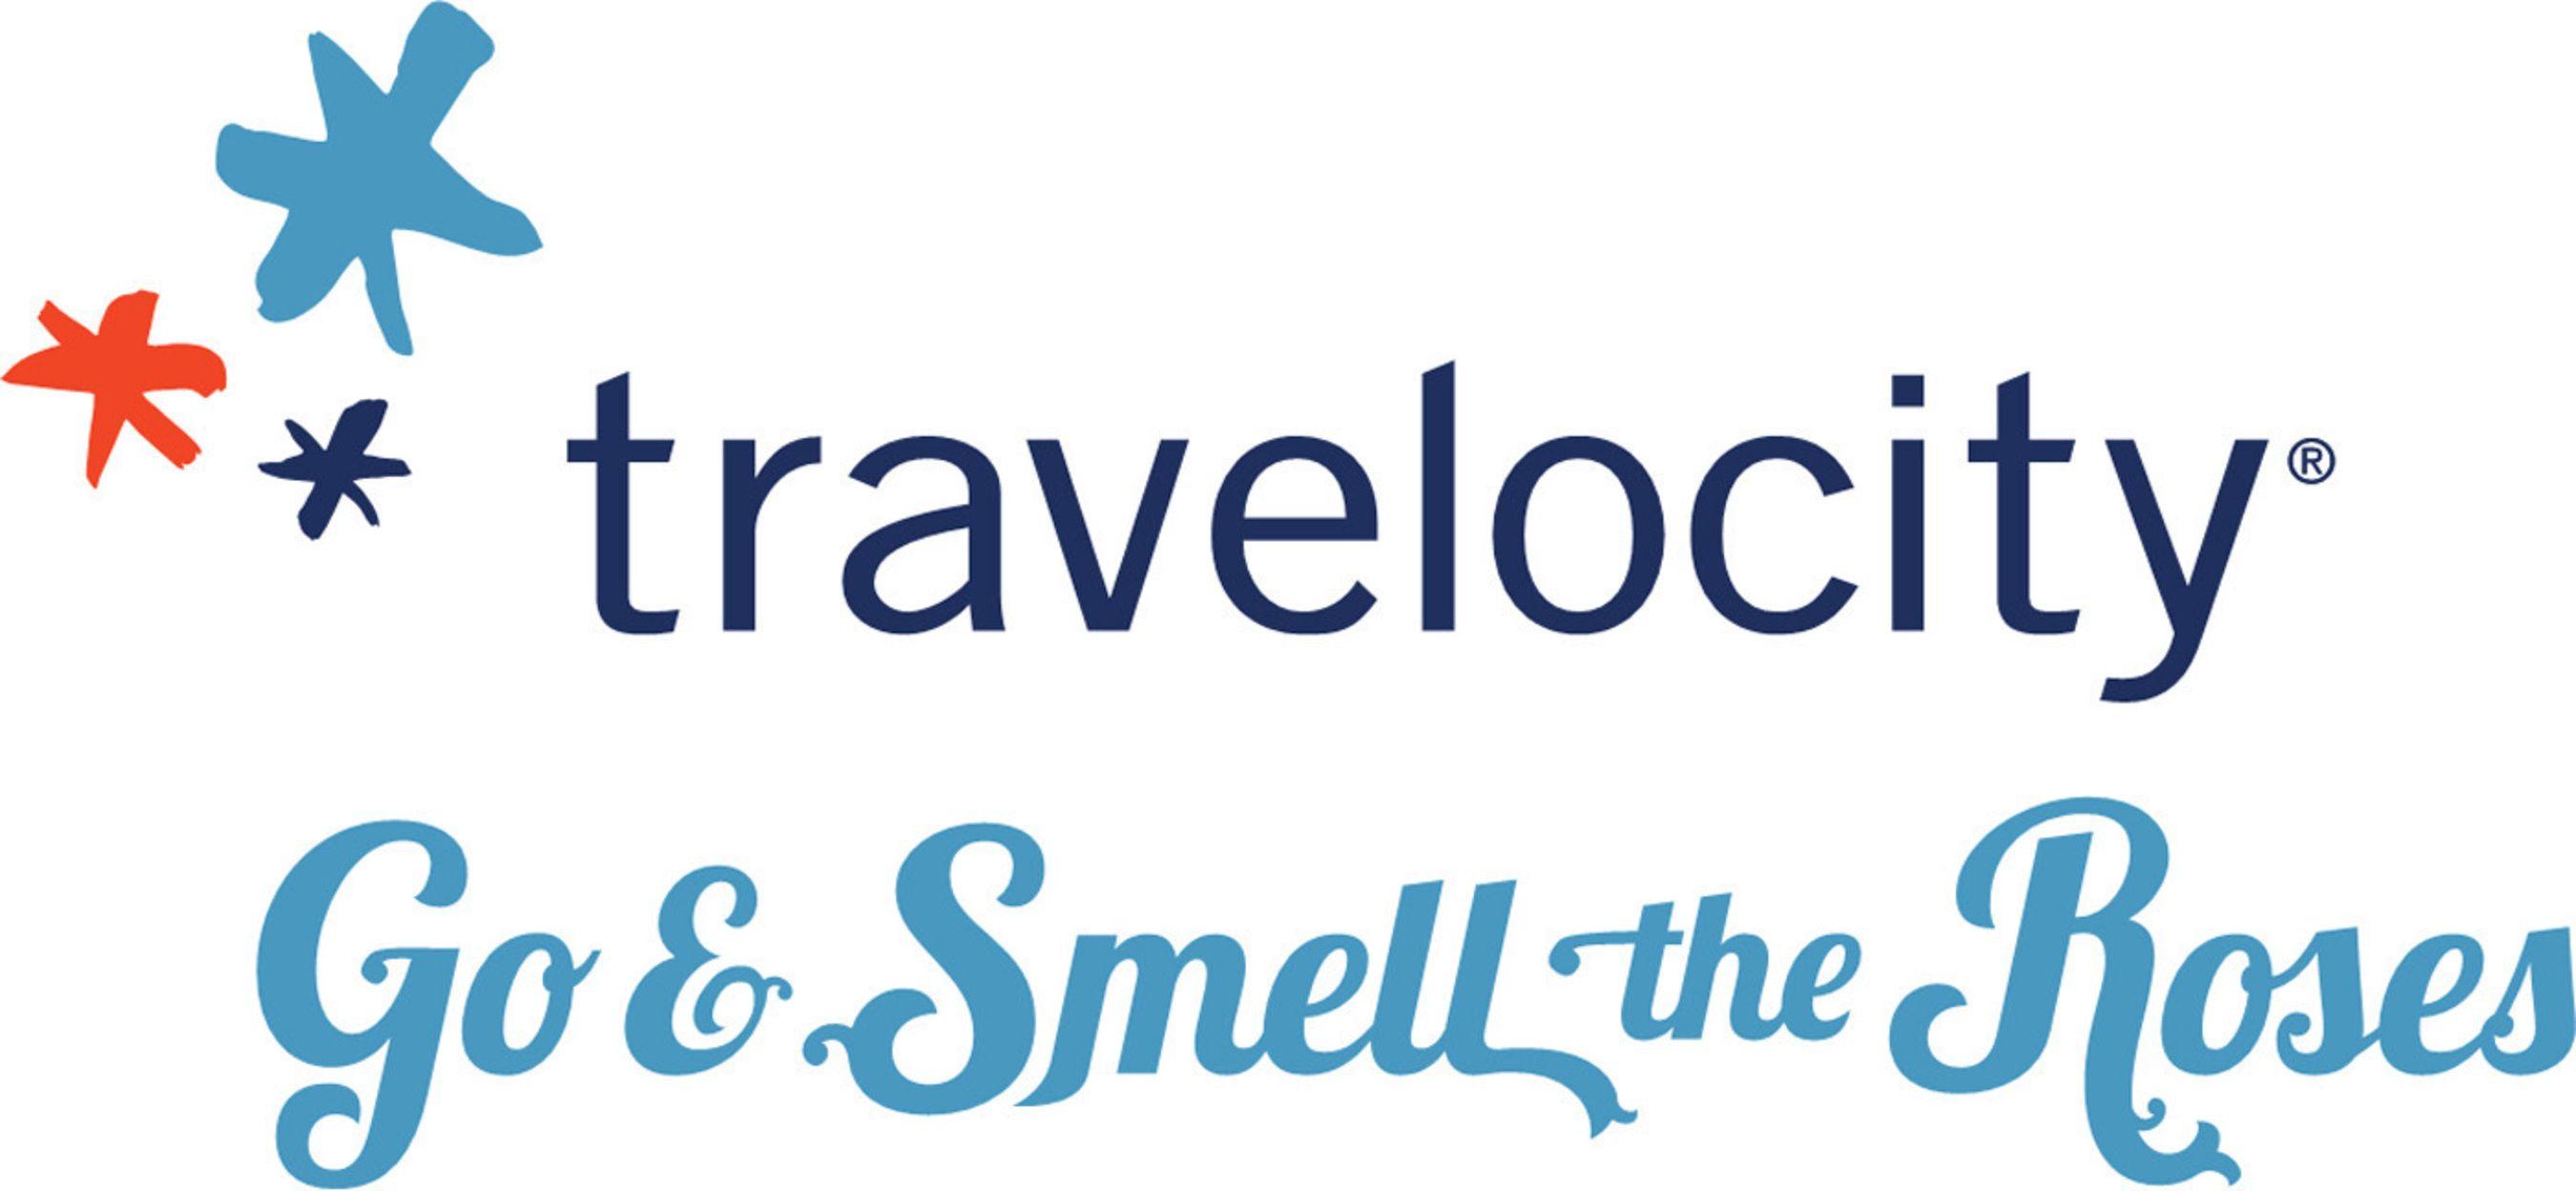 Travelosity Logo - Travelocity to promote travel packages with extended-format TV spots